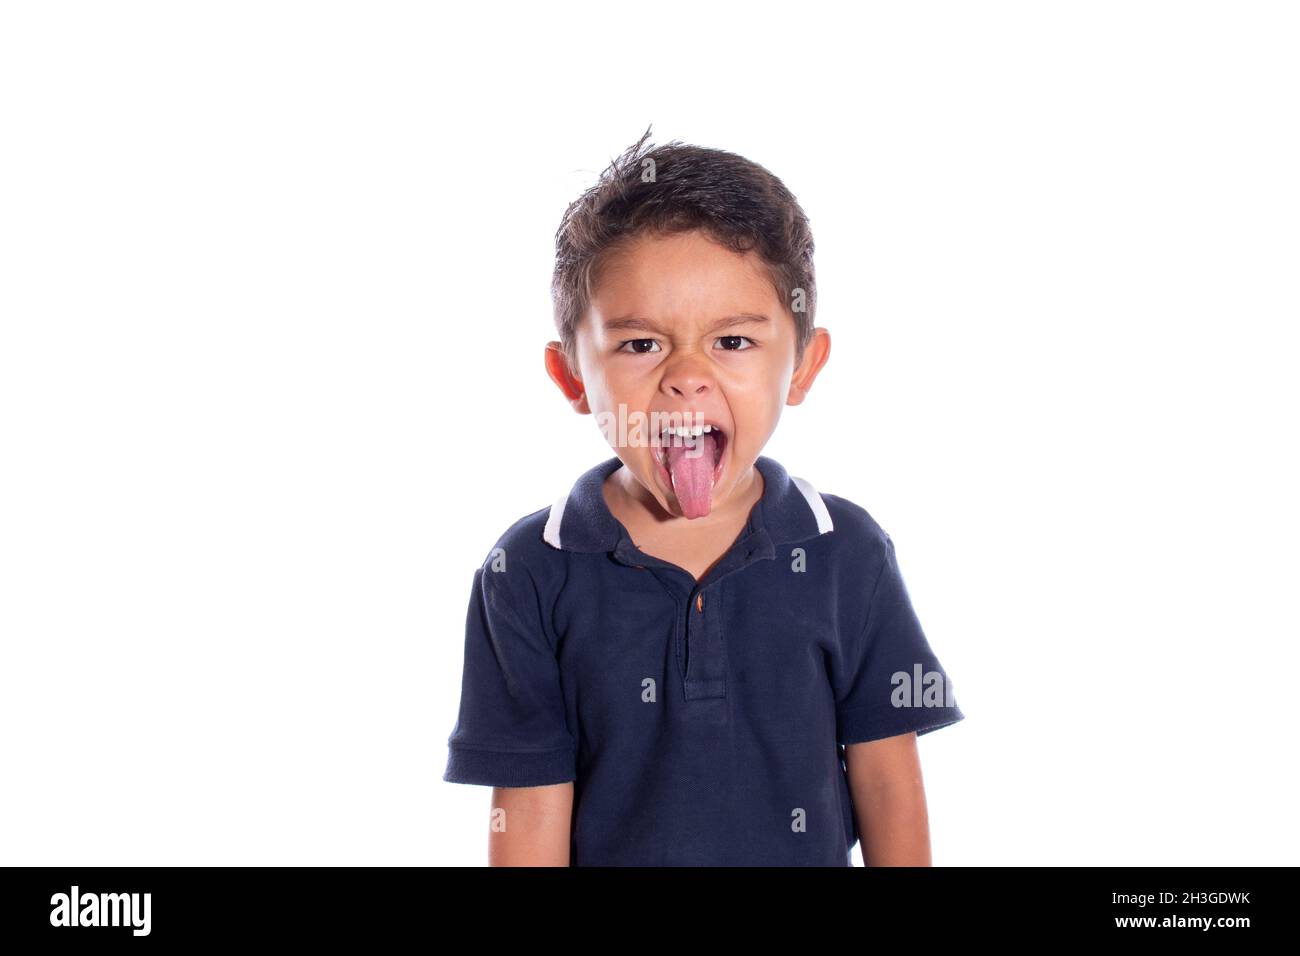 Boy sticking out his tongue isolated on white background. Boy making rock and roll gesture with tongue. Stock Photo